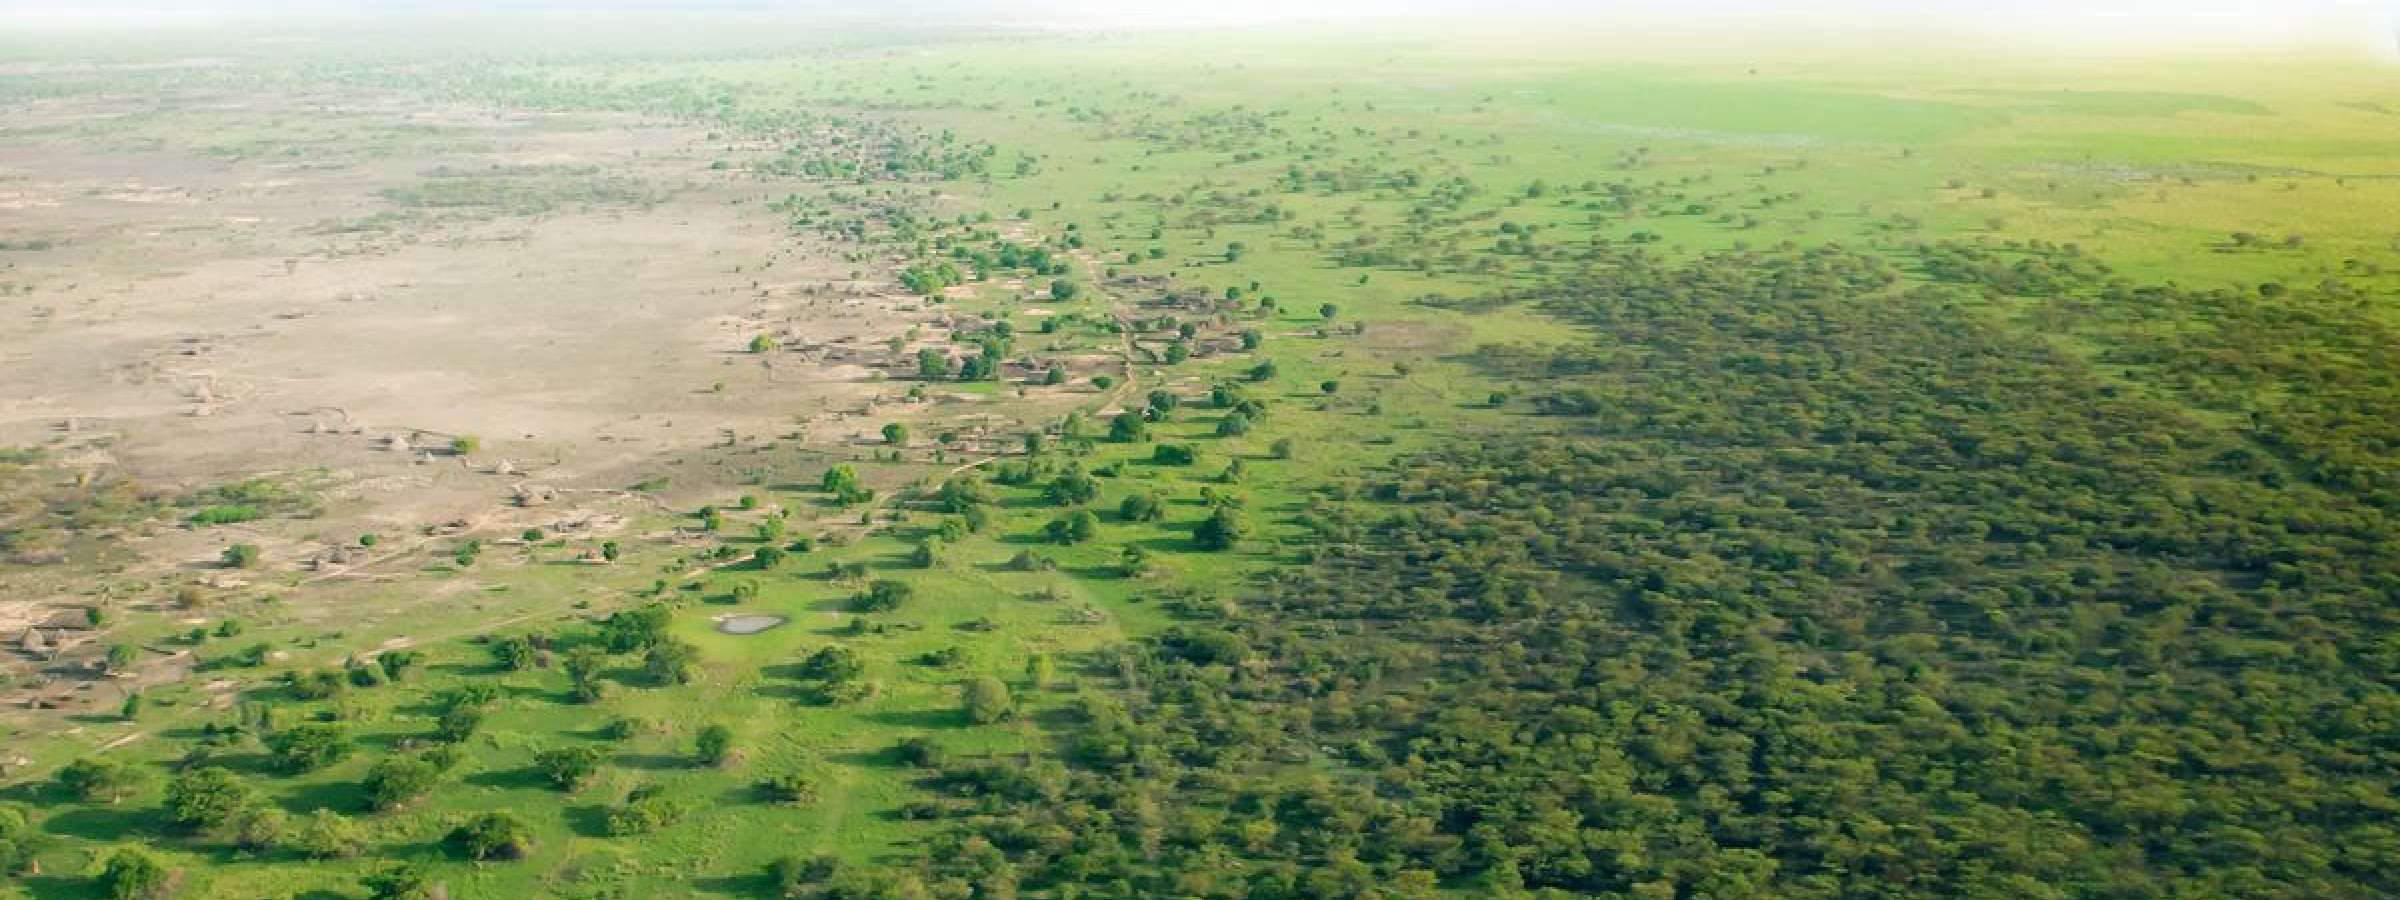 Drone shot showing the Great Green Wall